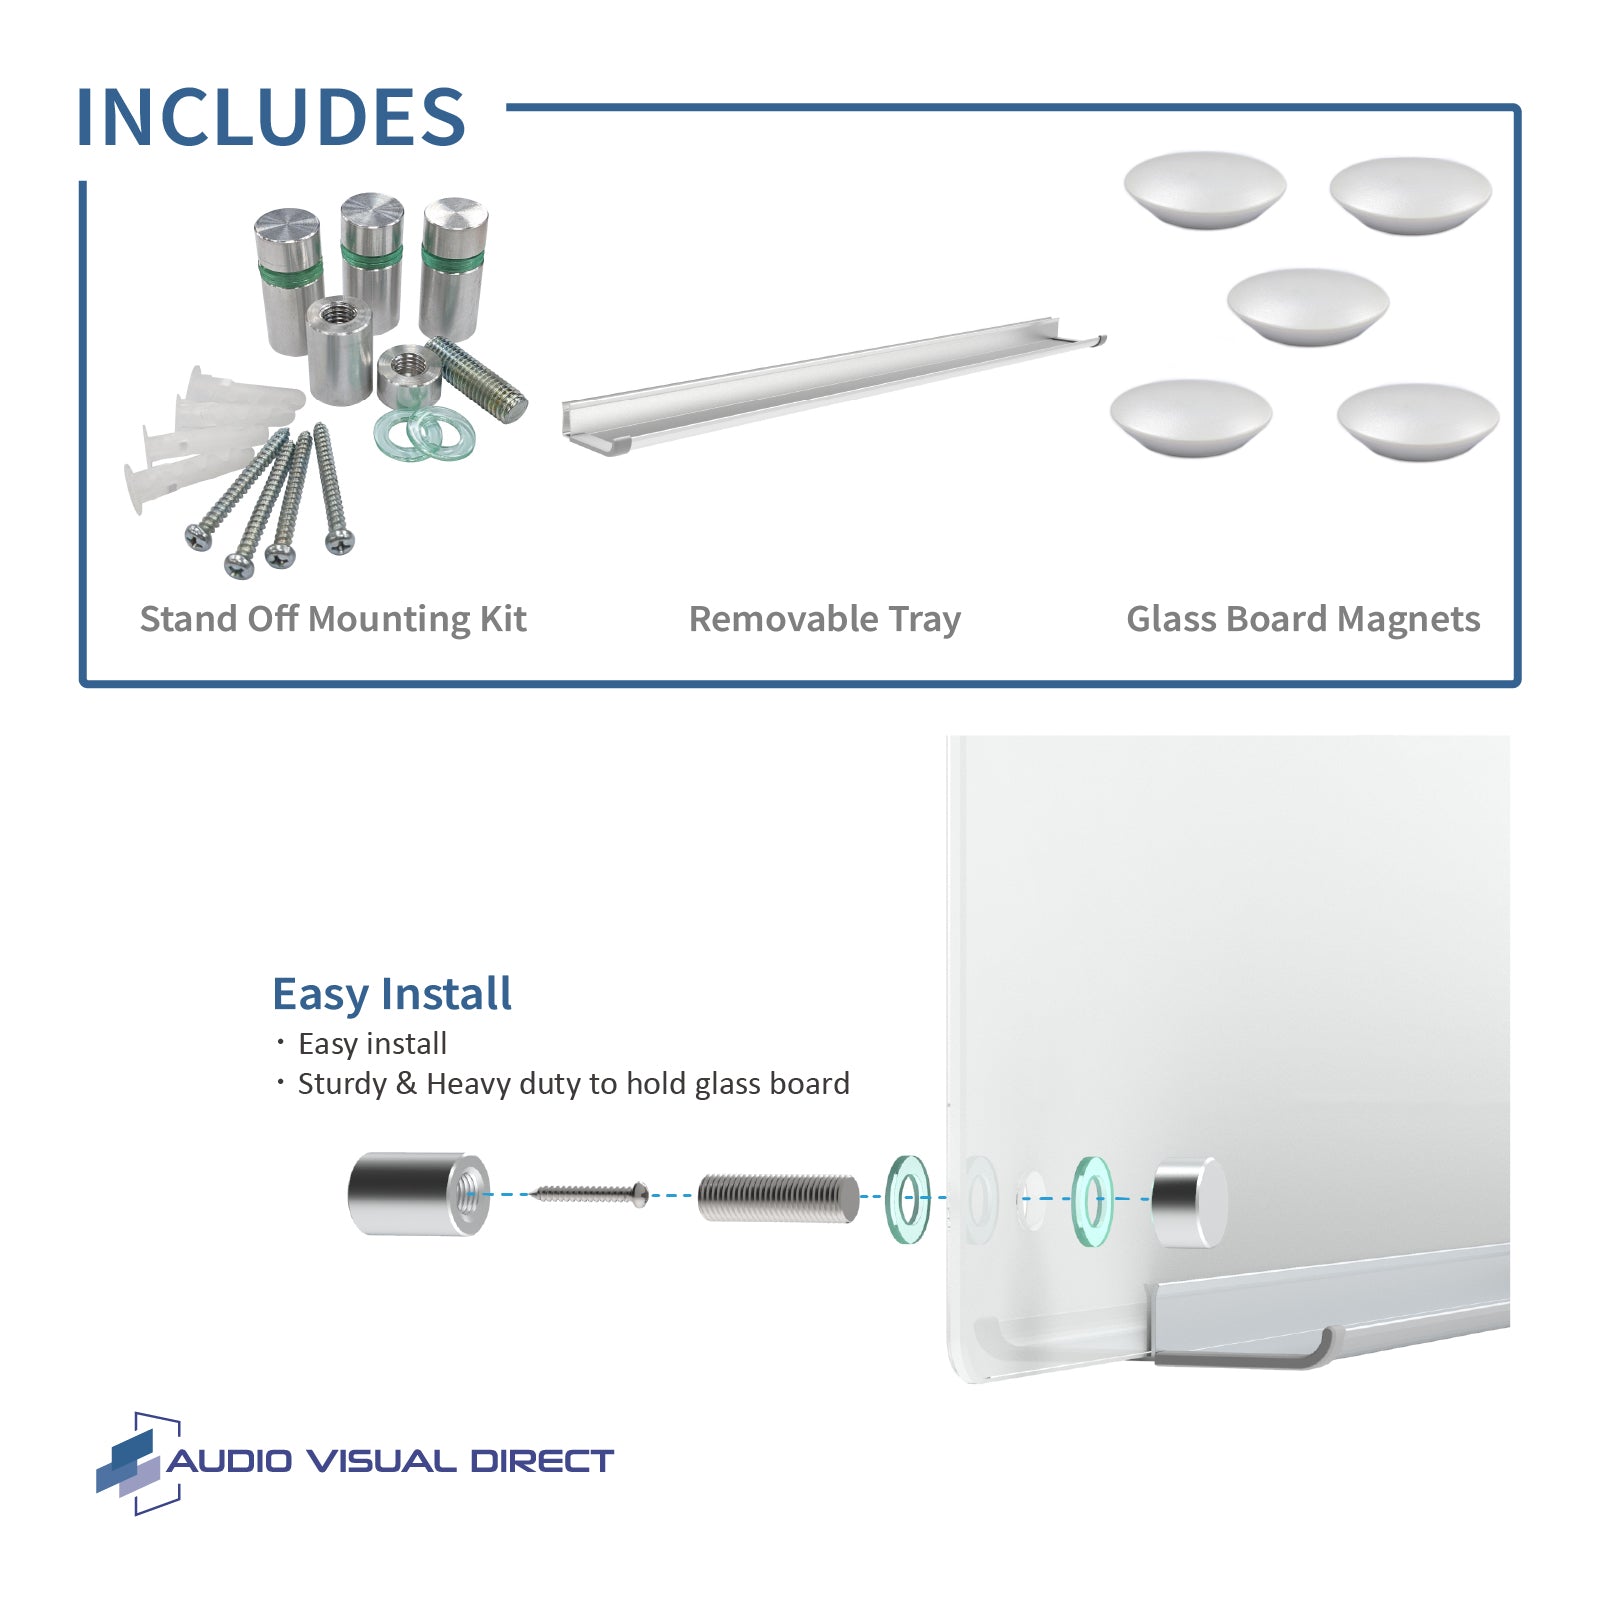 Info Sheet informing what is included in Audio-Visual Direct Glass dry erase board products. Stand off Mounting Kit, Removable Tray, and Glass Board Magnets.